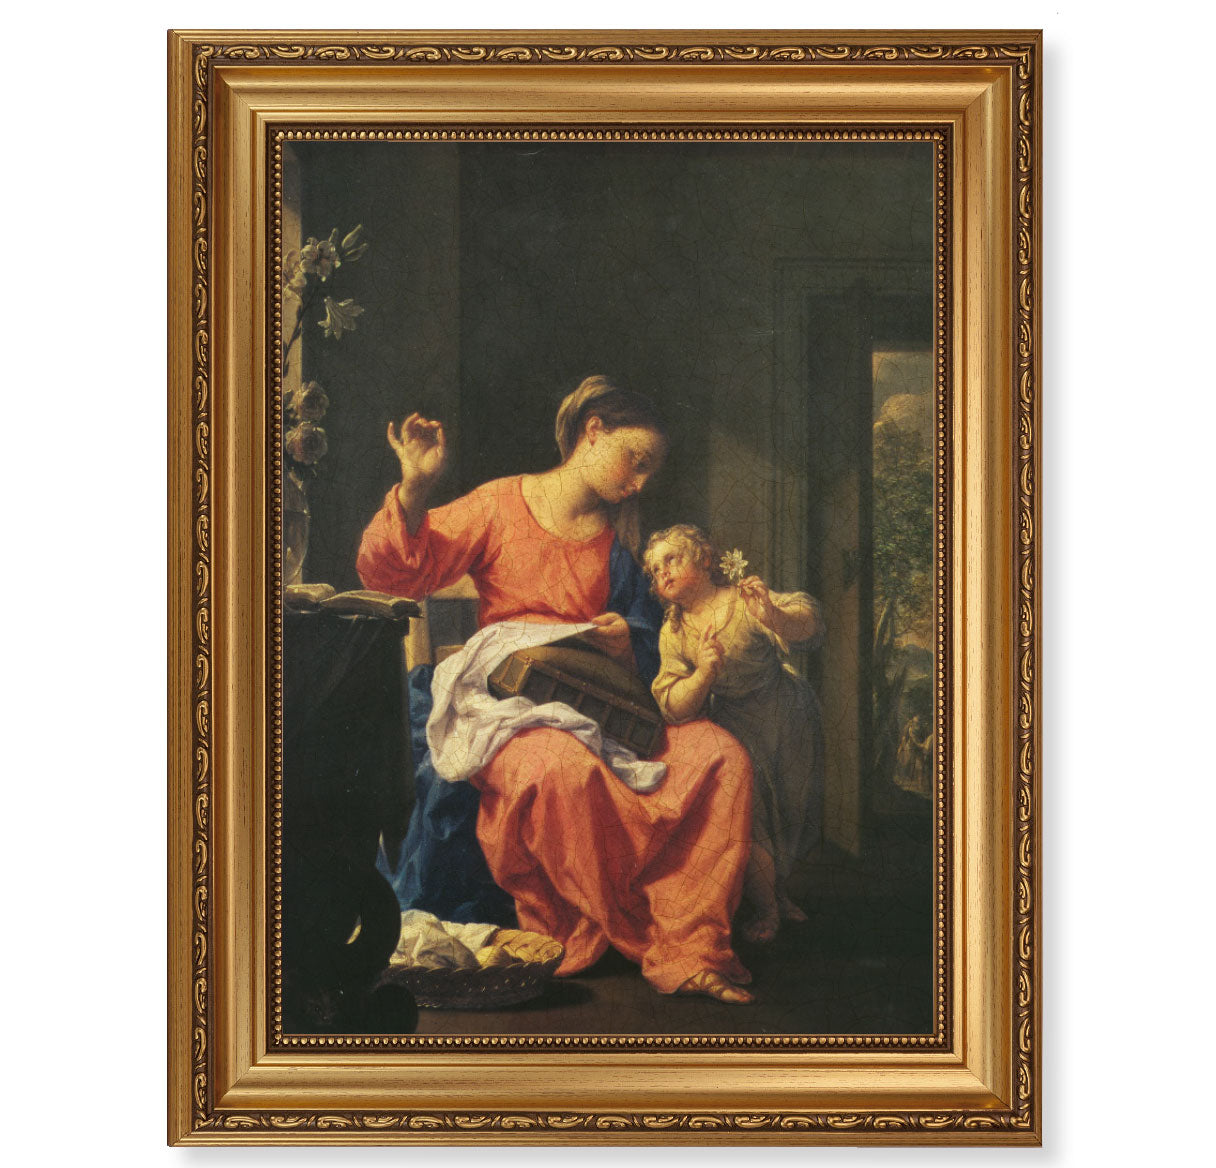 Jesus and Mary Antique Gold Framed Art